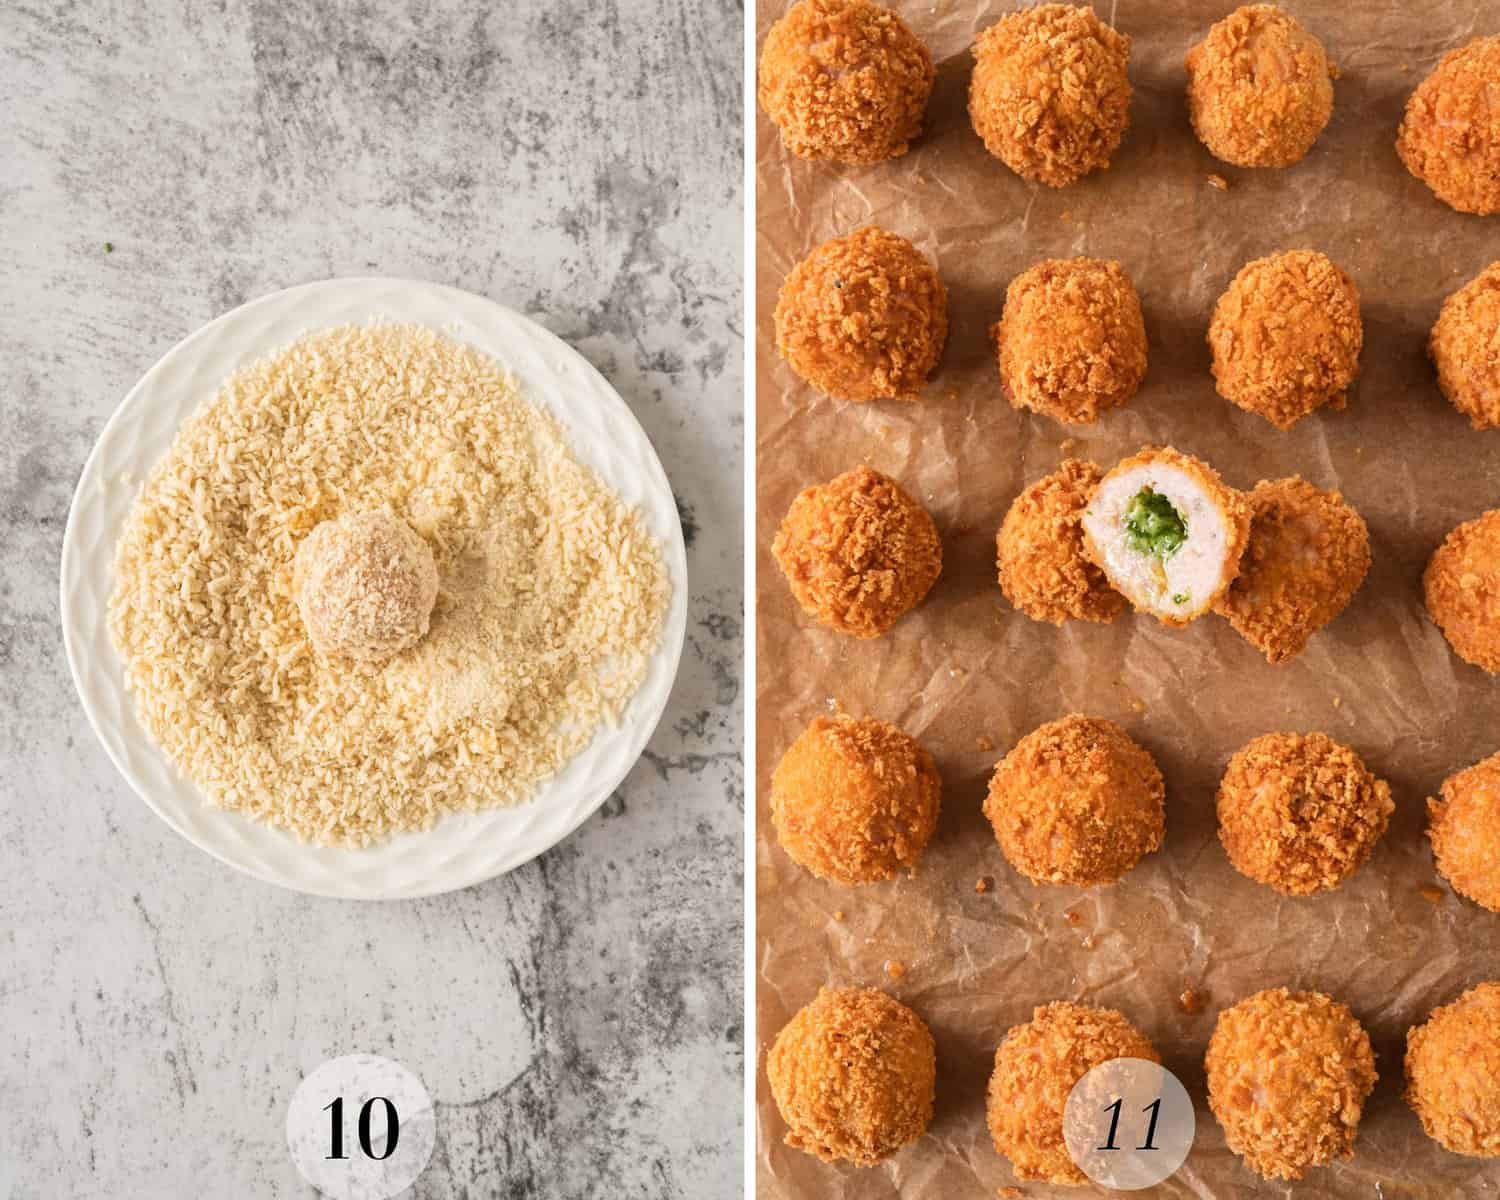 A series of photos showing the steps to crumb and fry chicken Kiev balls.